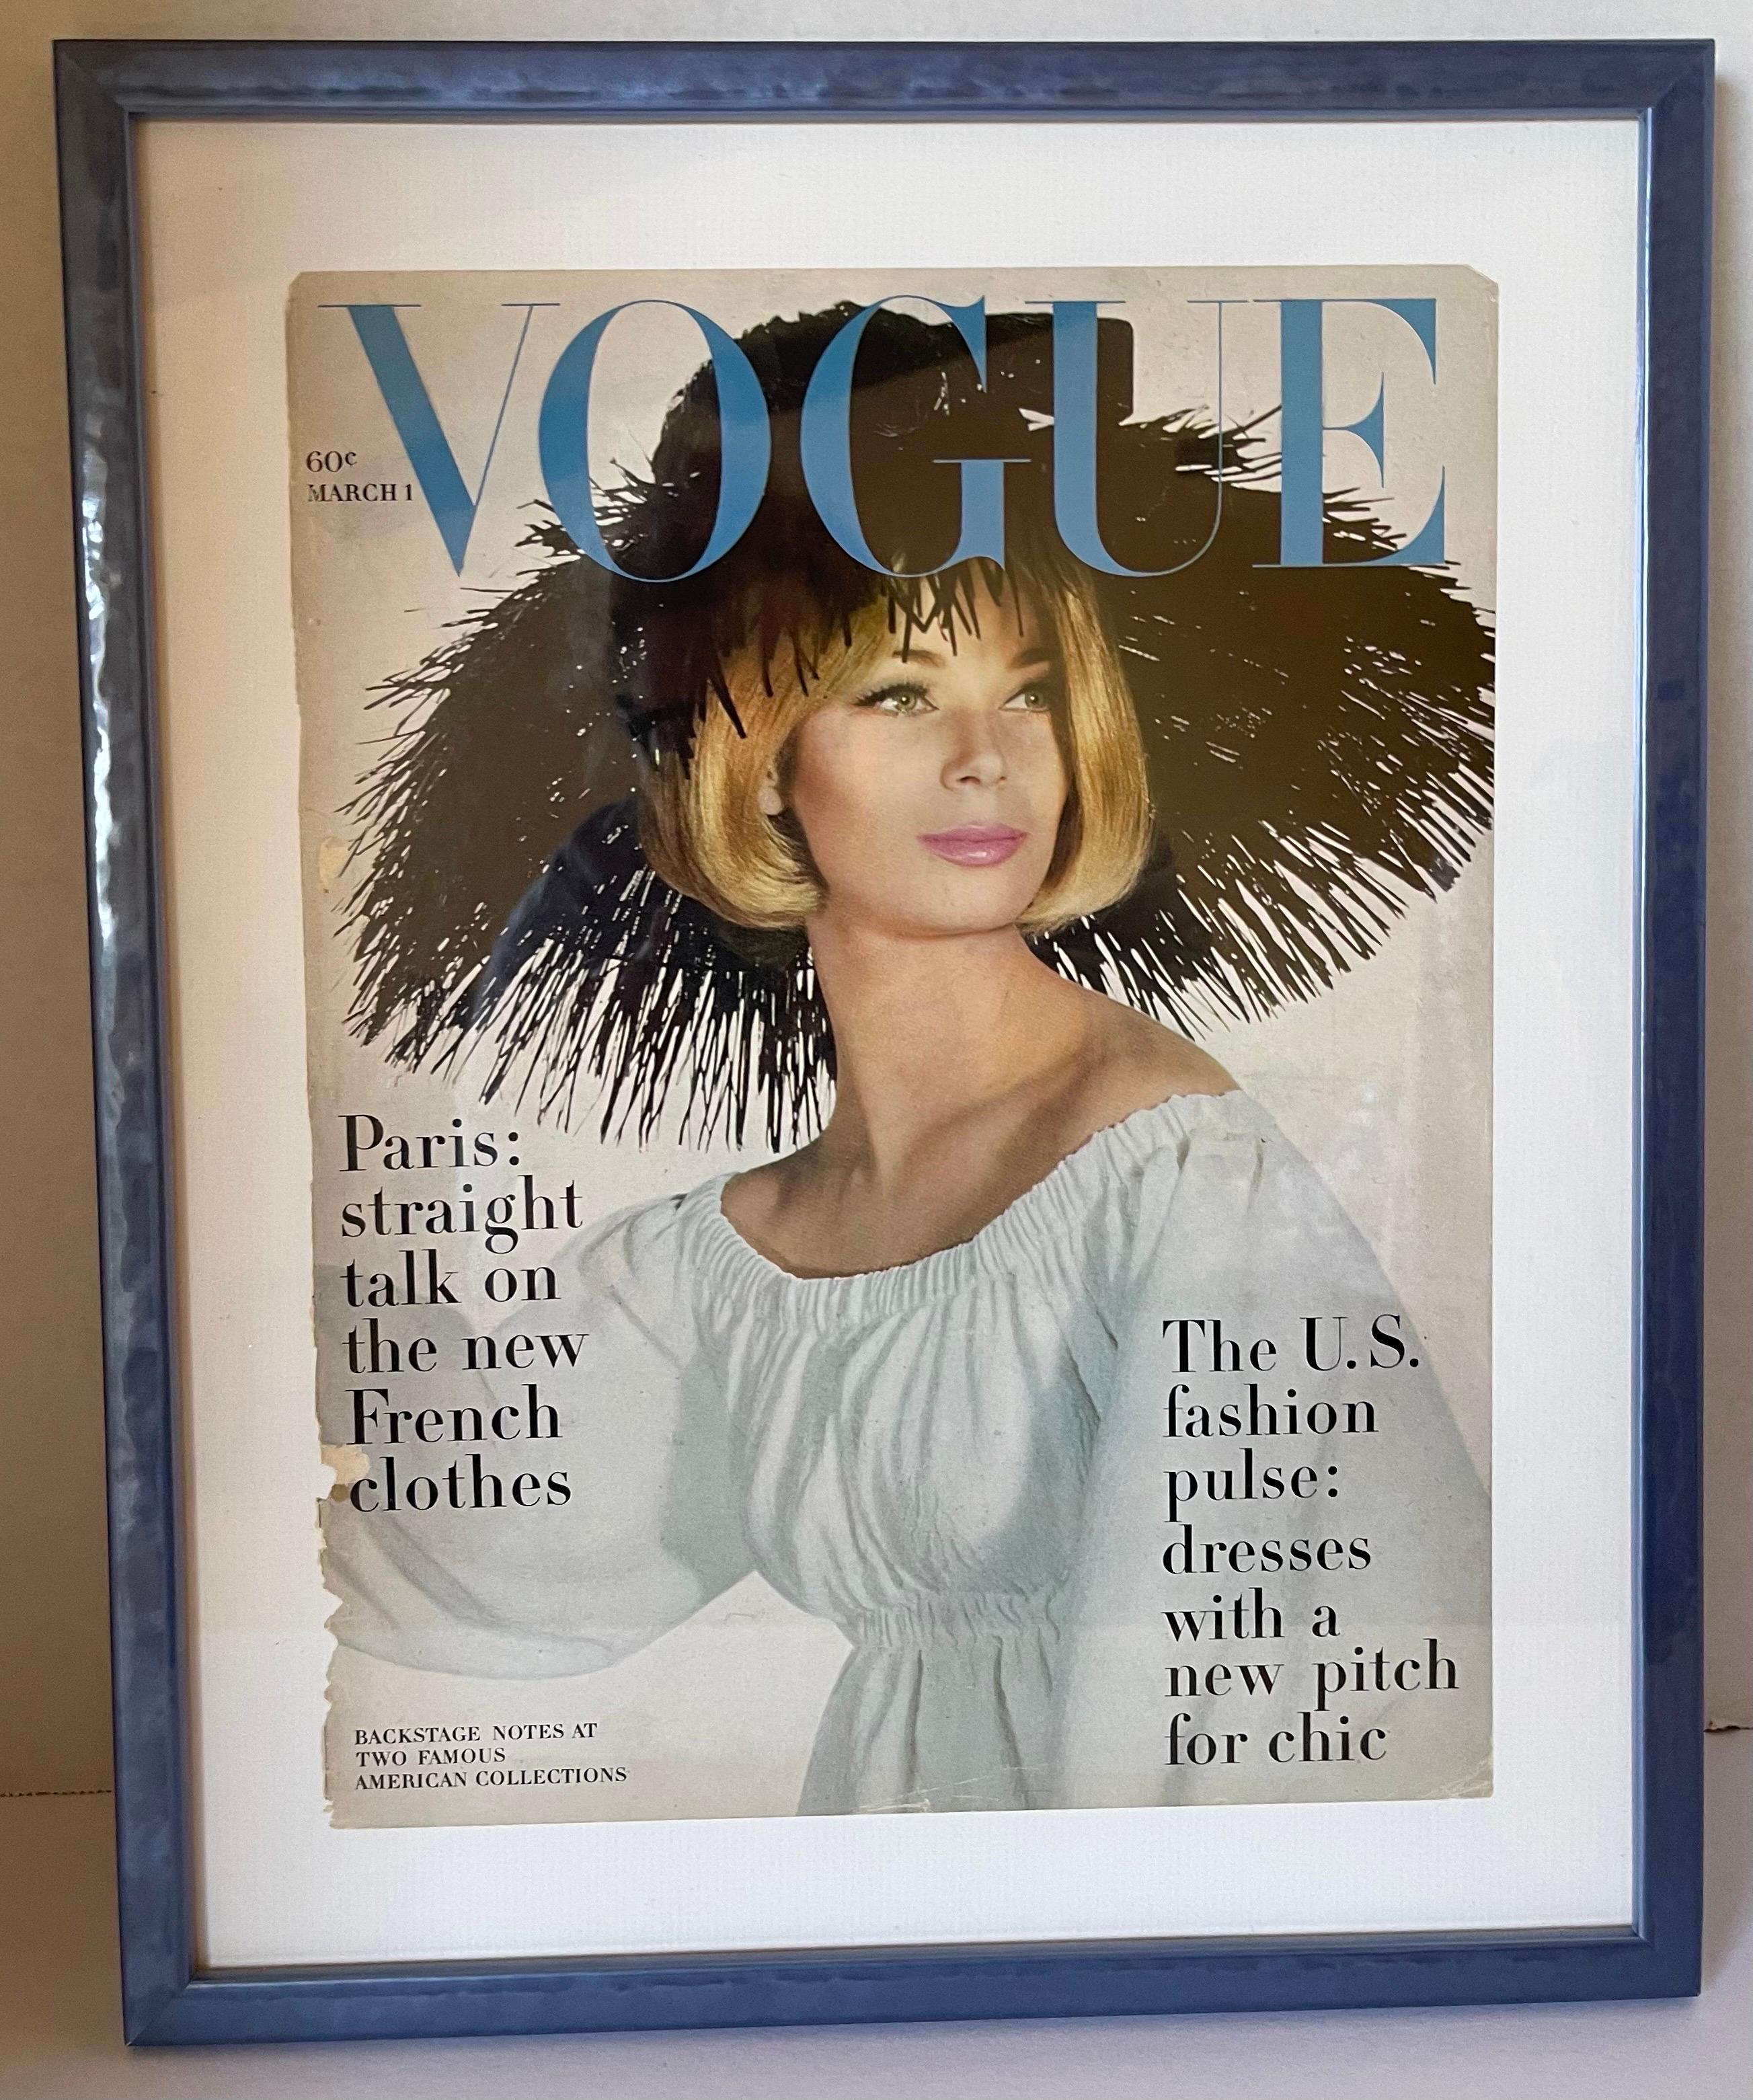 Mid-Century Modern Vogue Magazine March 1963 Framed Cover For Sale